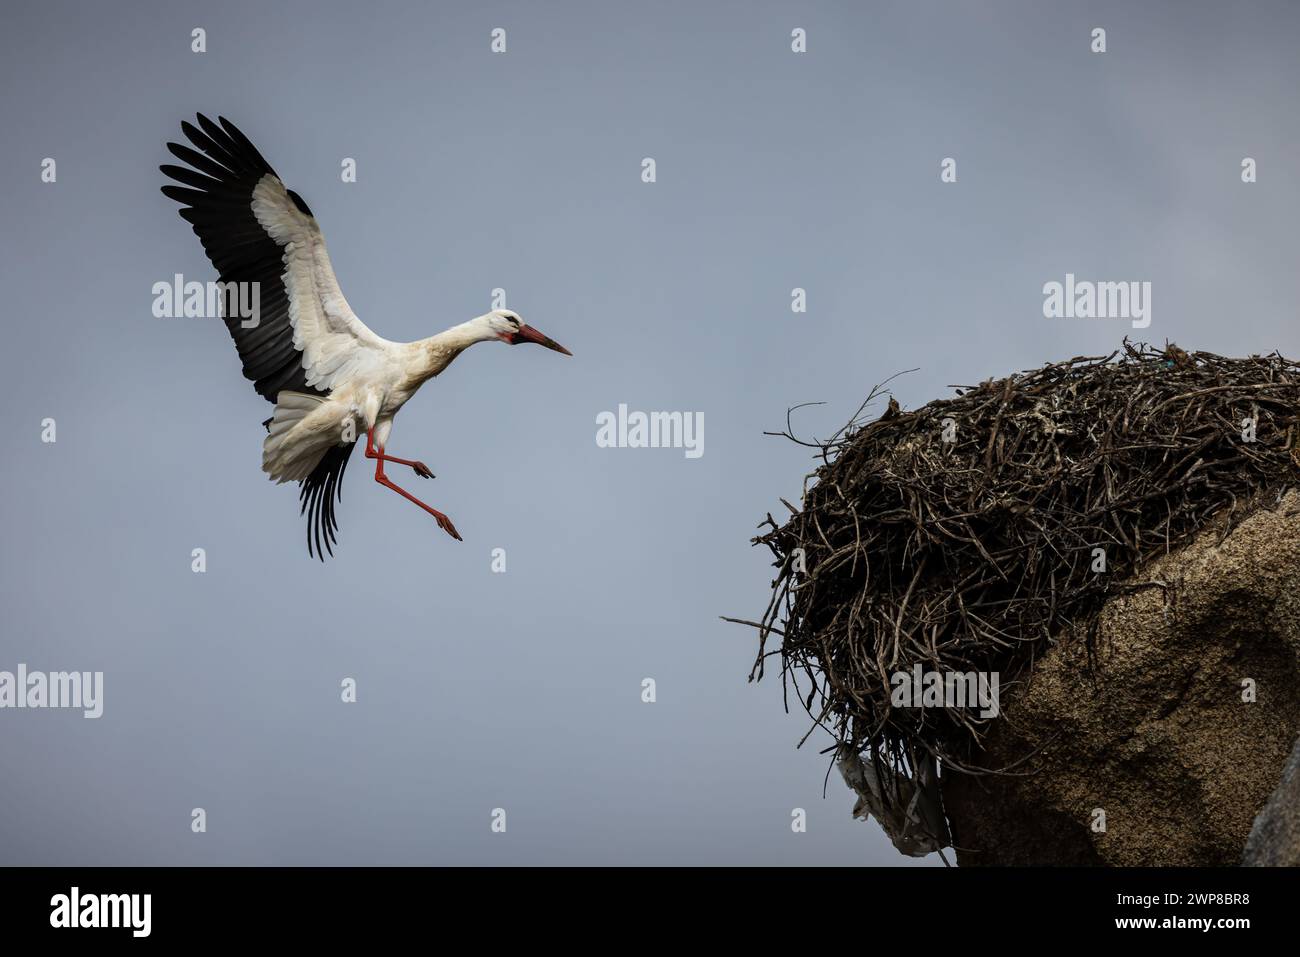 A low angle shot of a stork flying near its nest under a clear blue sky Stock Photo